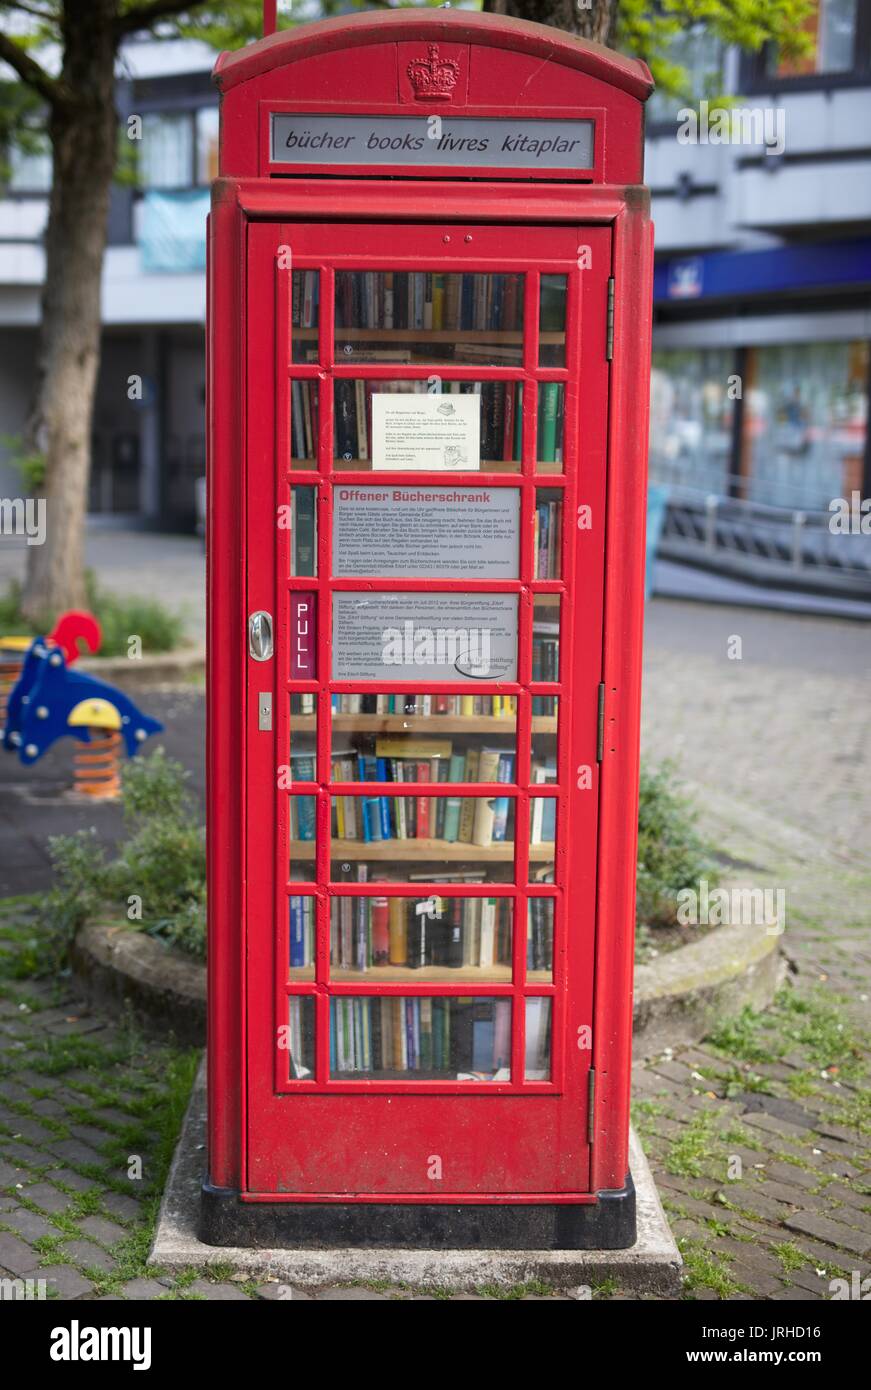 Old British Telephone Booth converted into a public book shelve Stock Photo